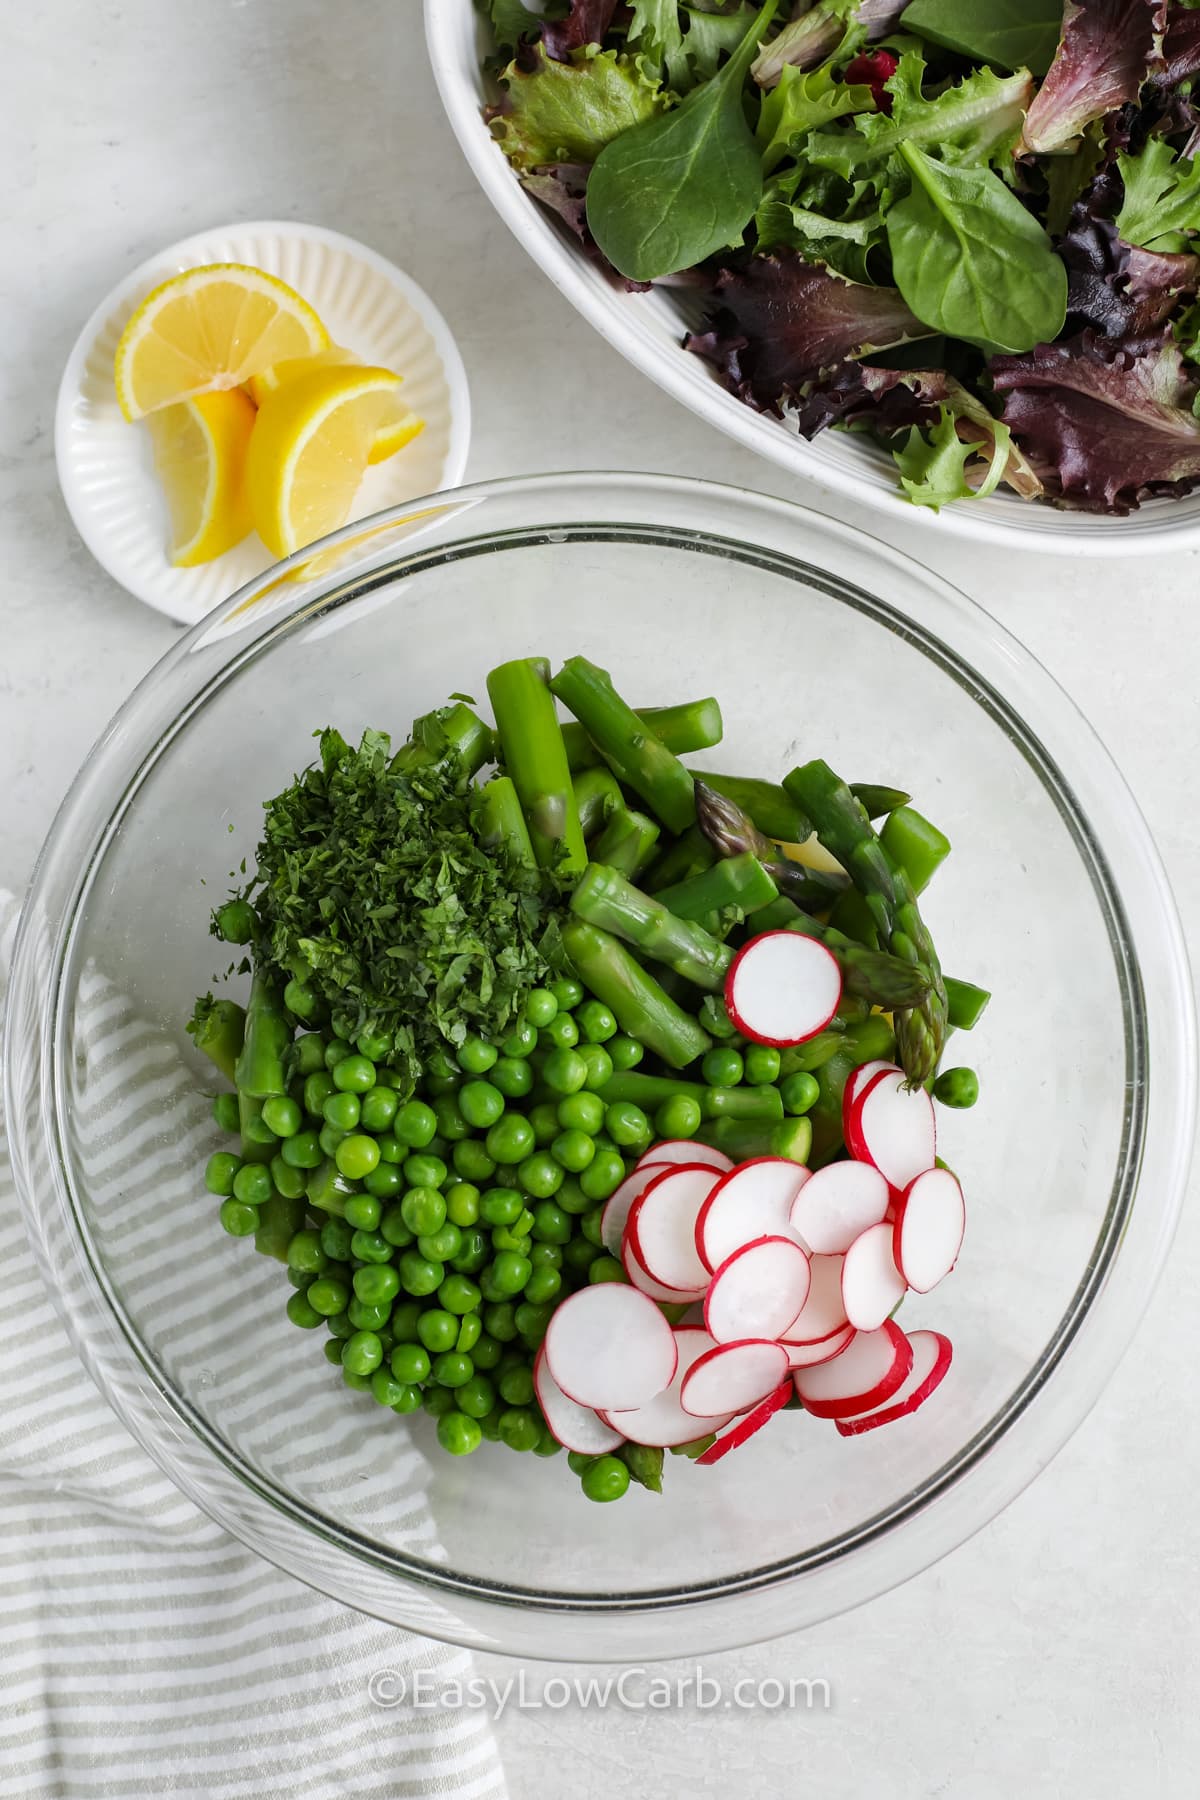 Ingredients to make asparagus salad being combined in a bowl